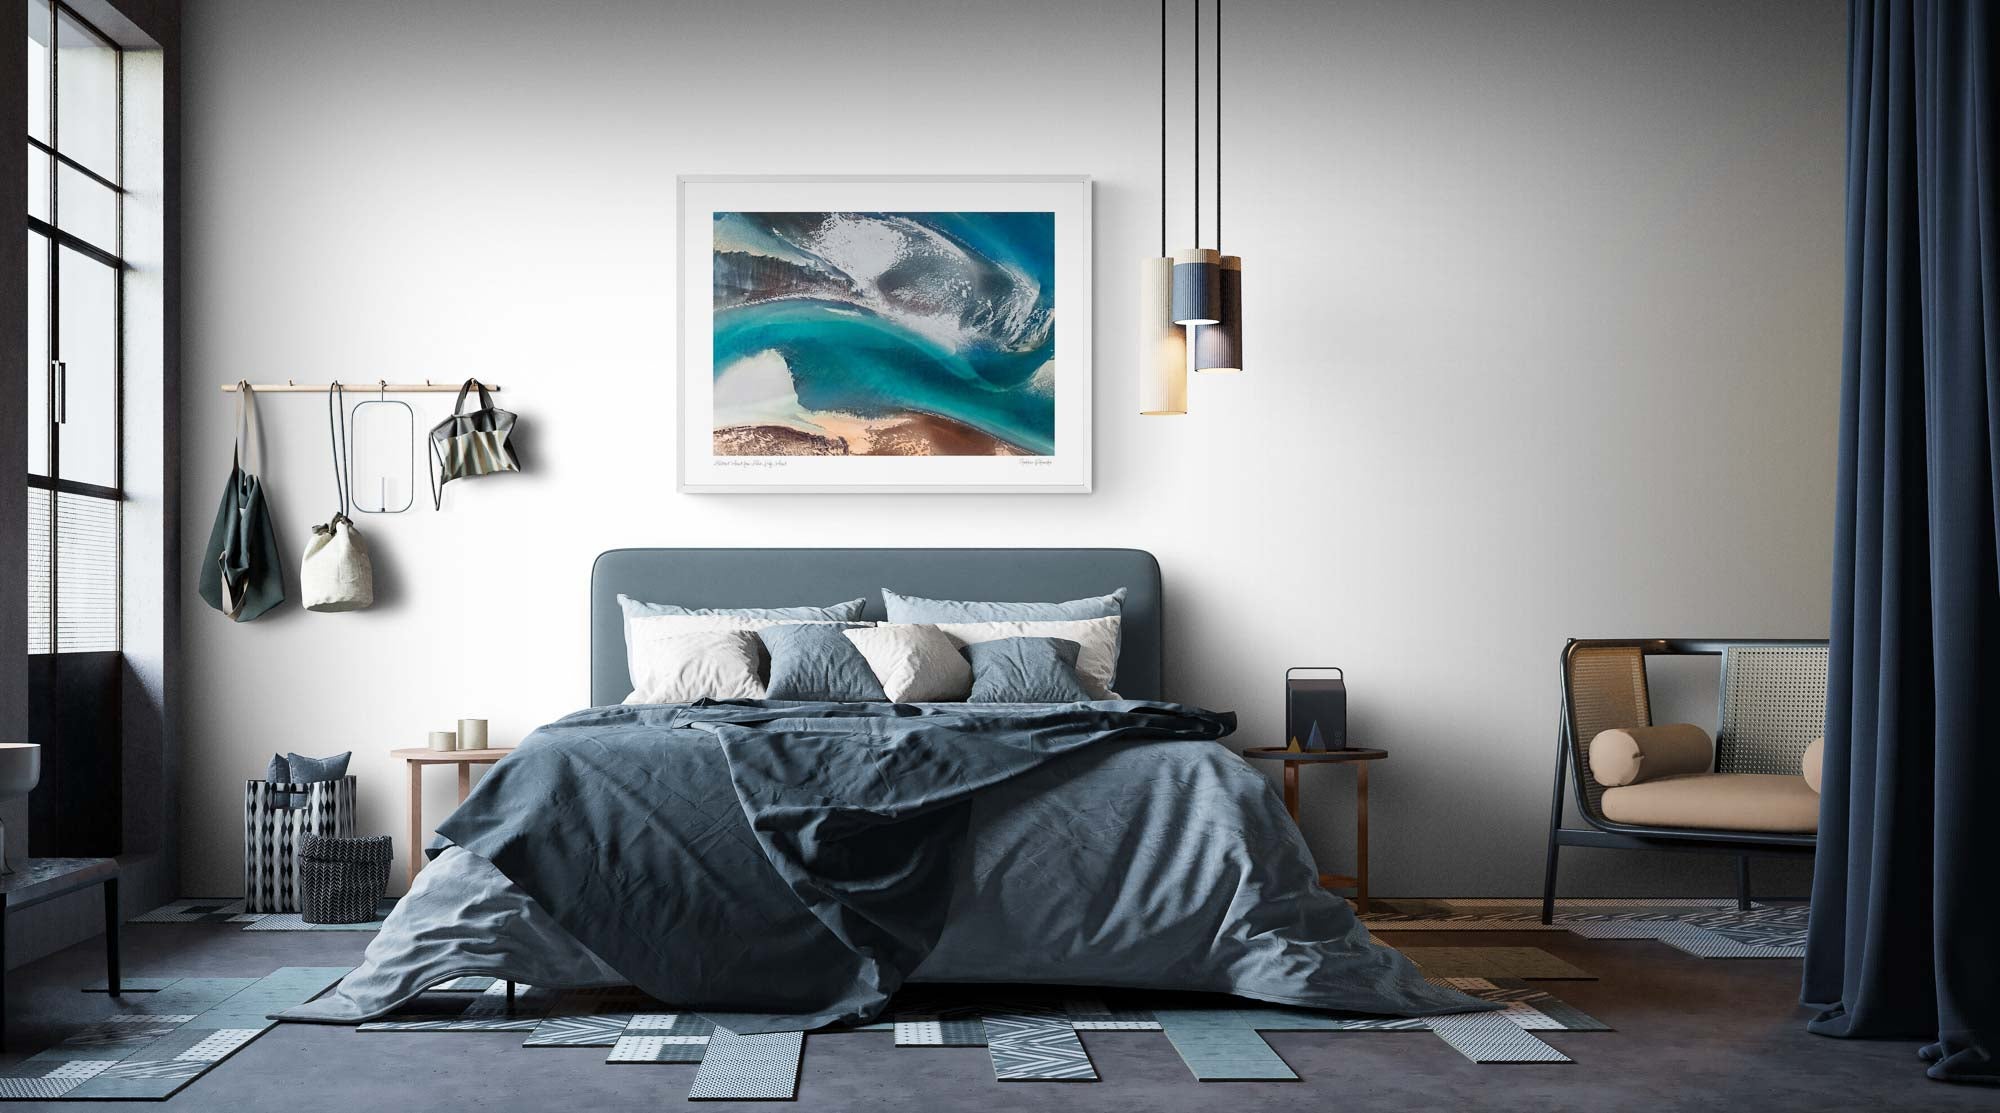 Image of a bedroom with a Wall art picture from Iceland